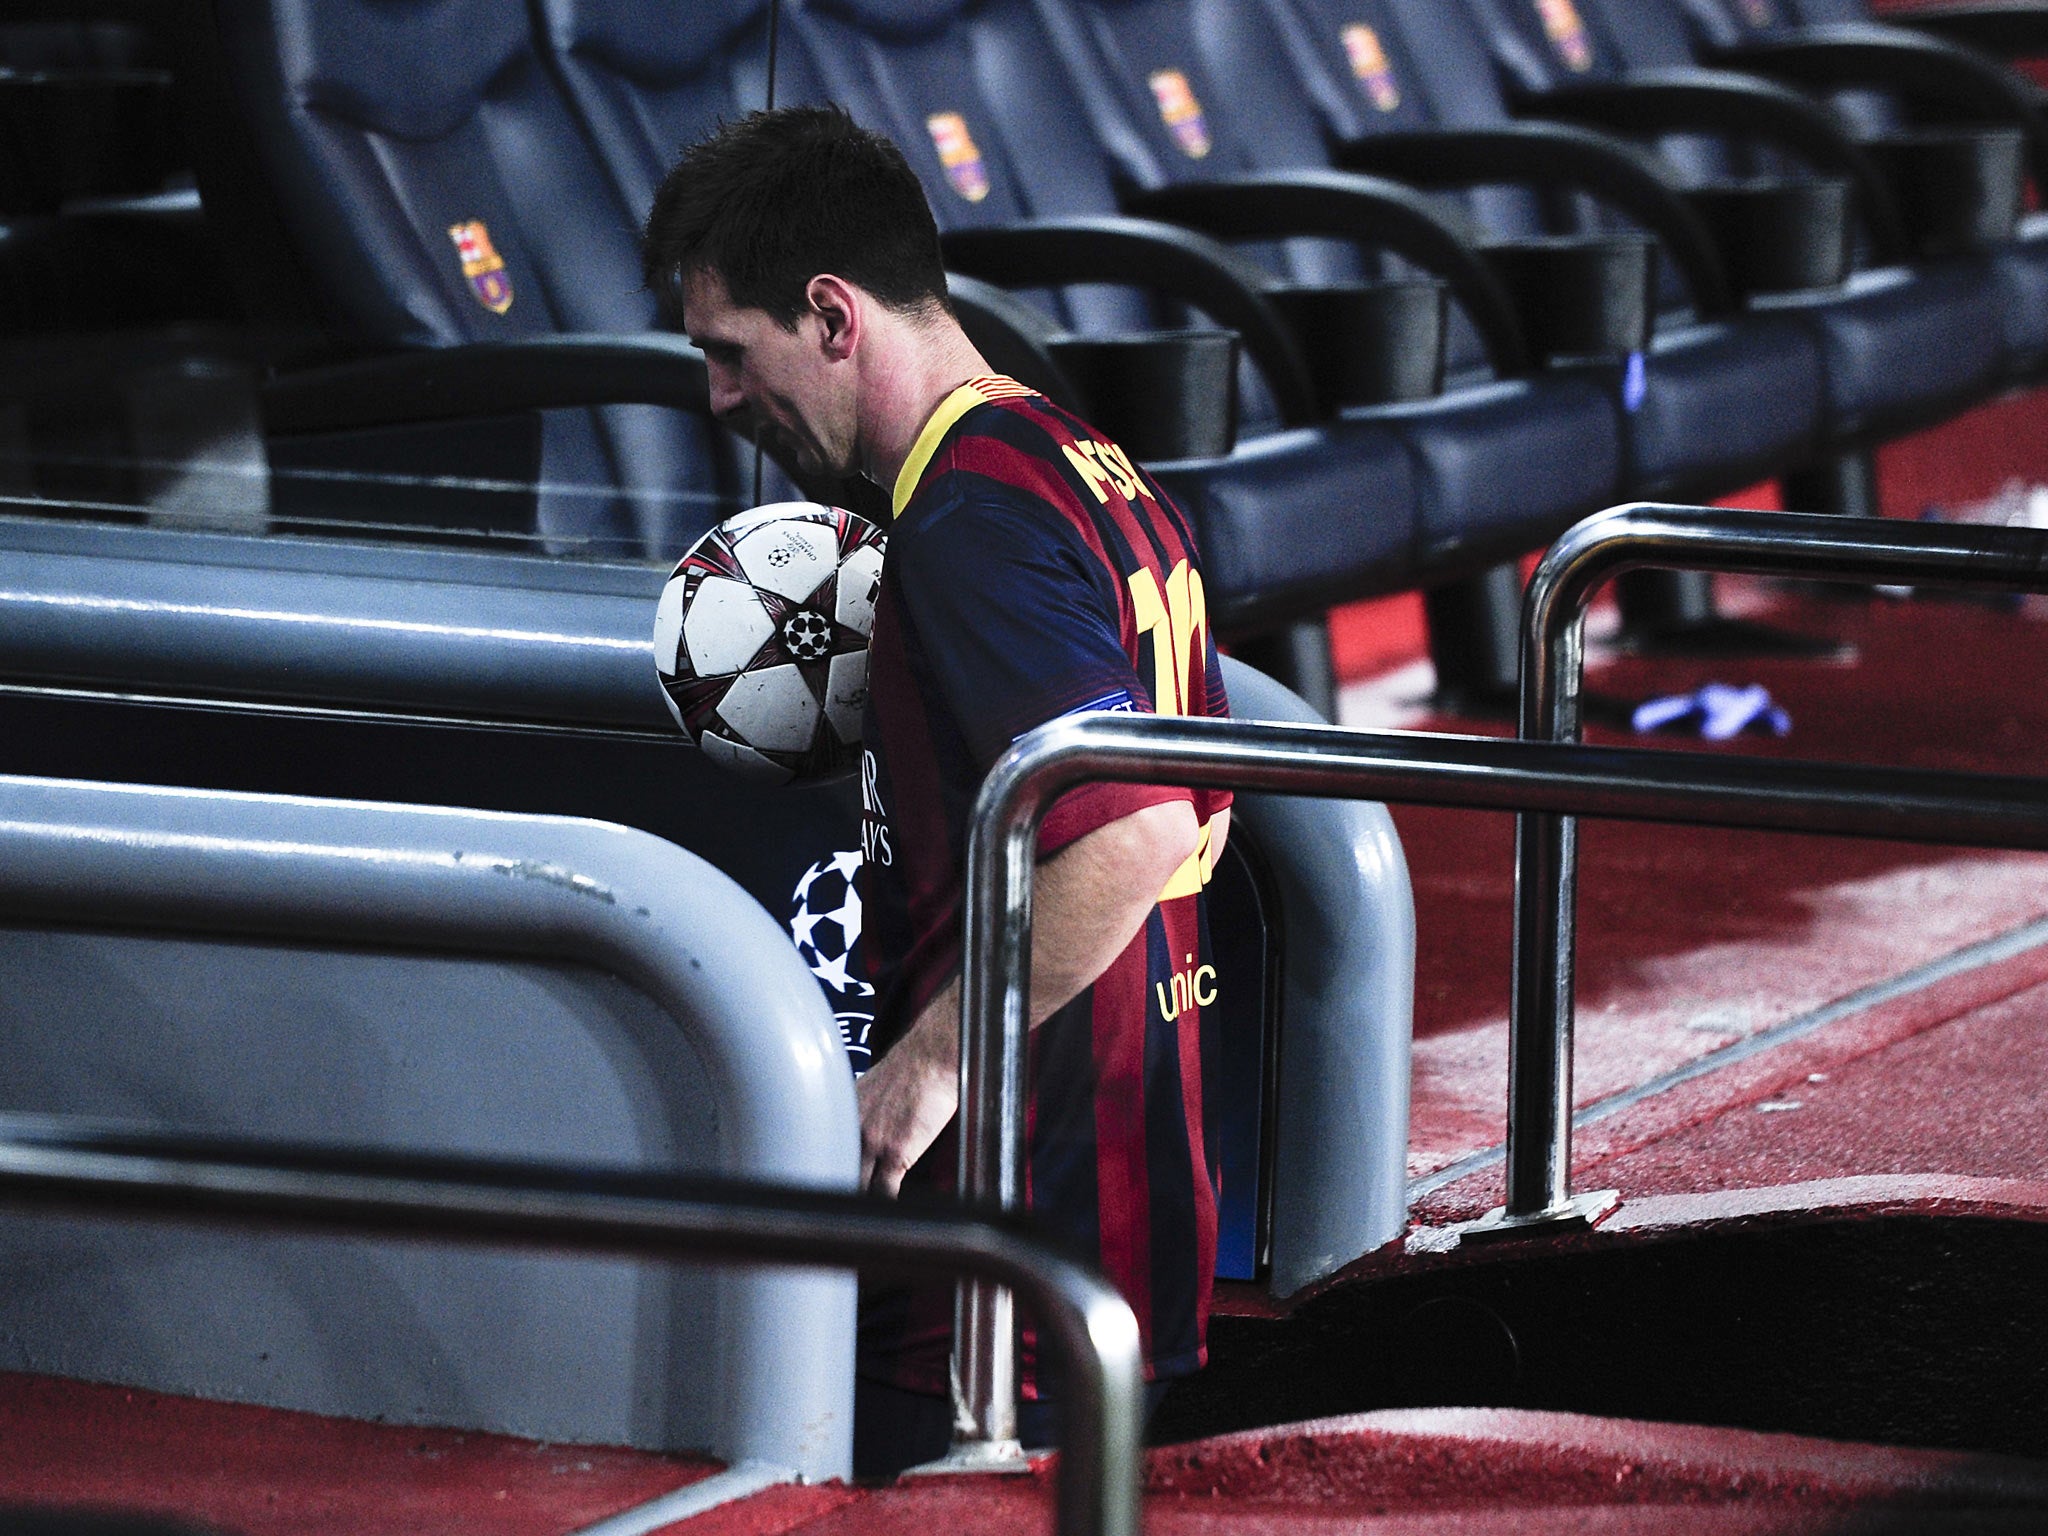 Lionel Messi leaves with the match ball after his hat-trick against Ajax